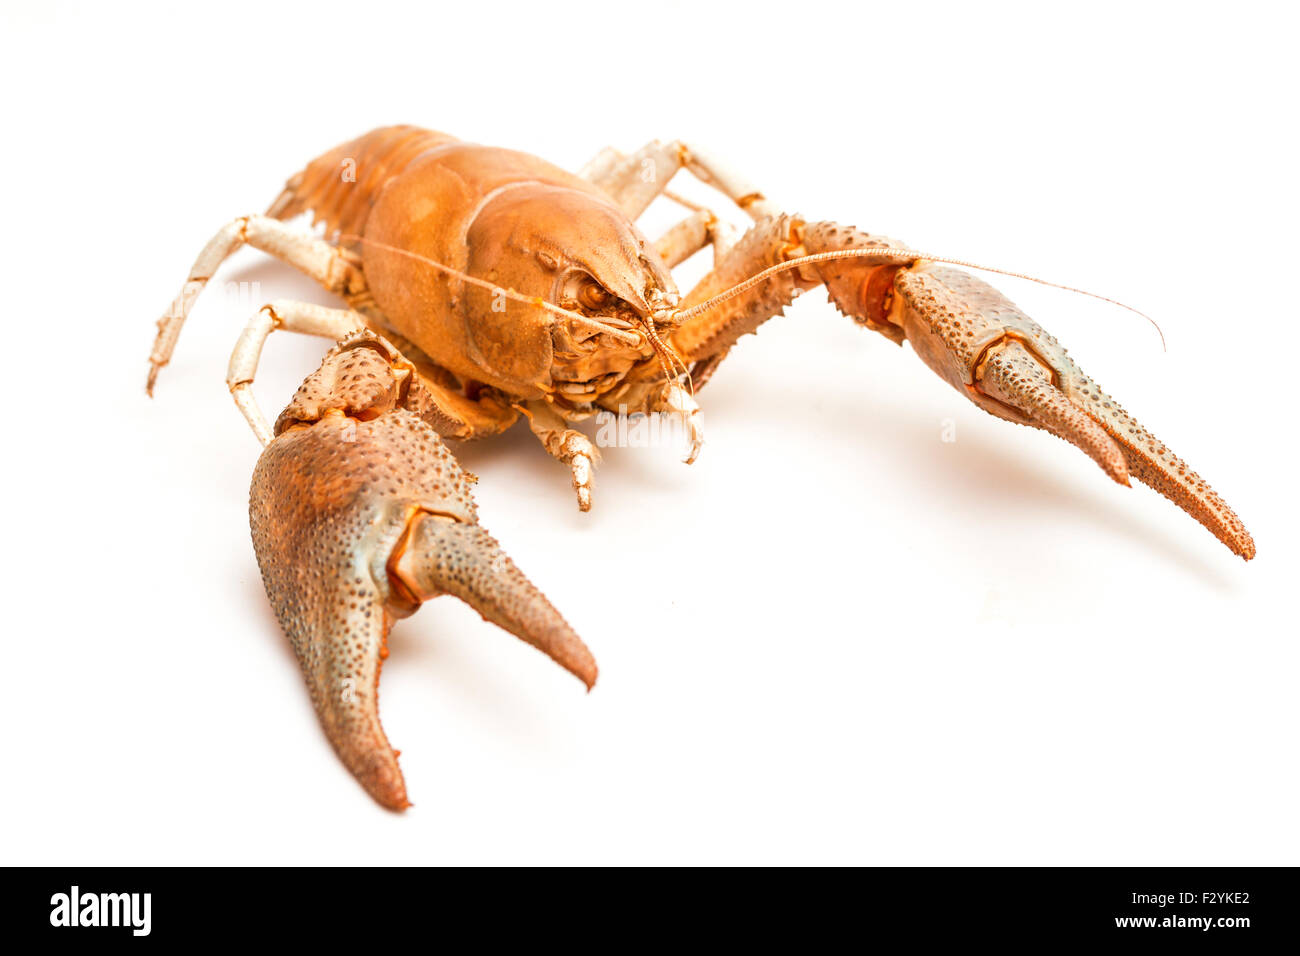 A cooked lobster crab isolated on white background Stock Photo